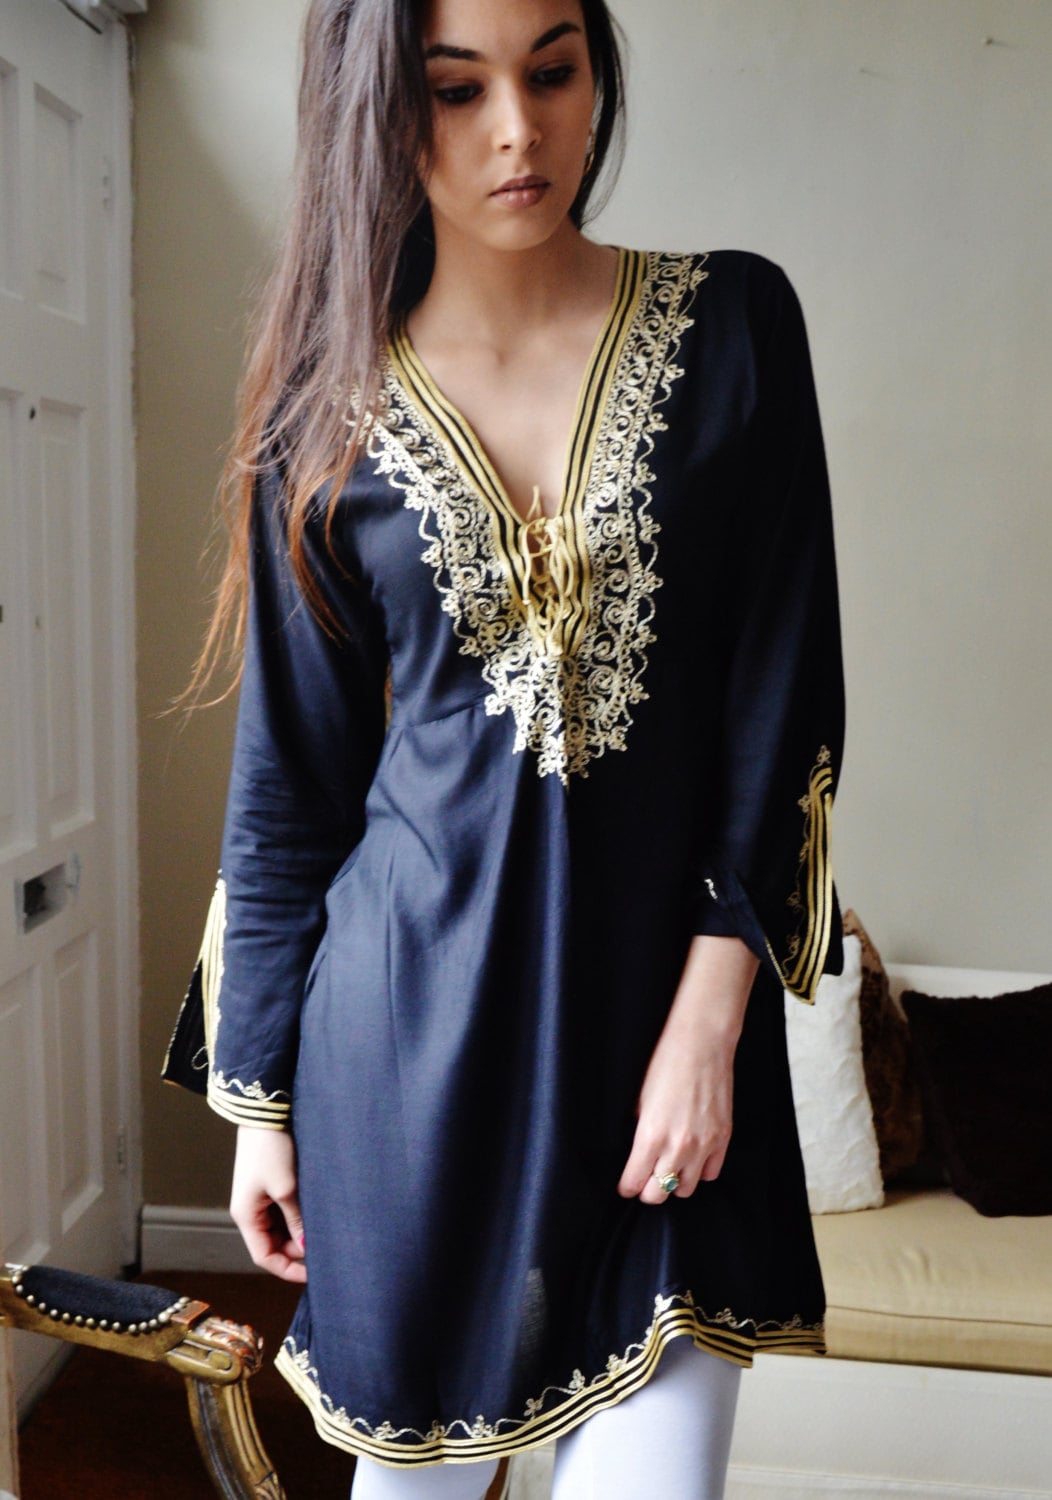 Embroidered Ladies Tunics to wear over jeans 